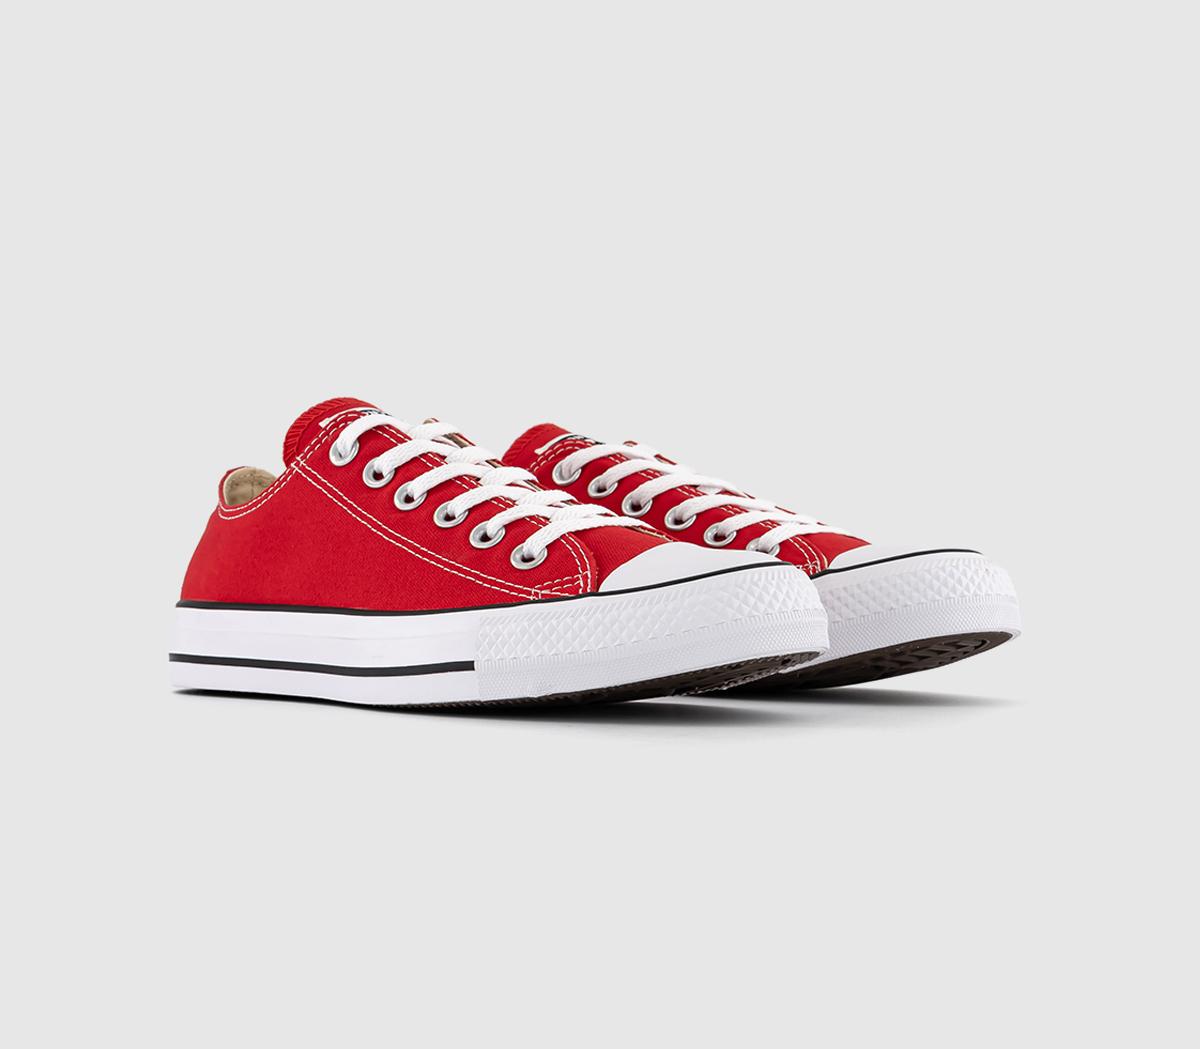 Mens Converse All Star Low Canvas Trainers In Red / White, 3.5